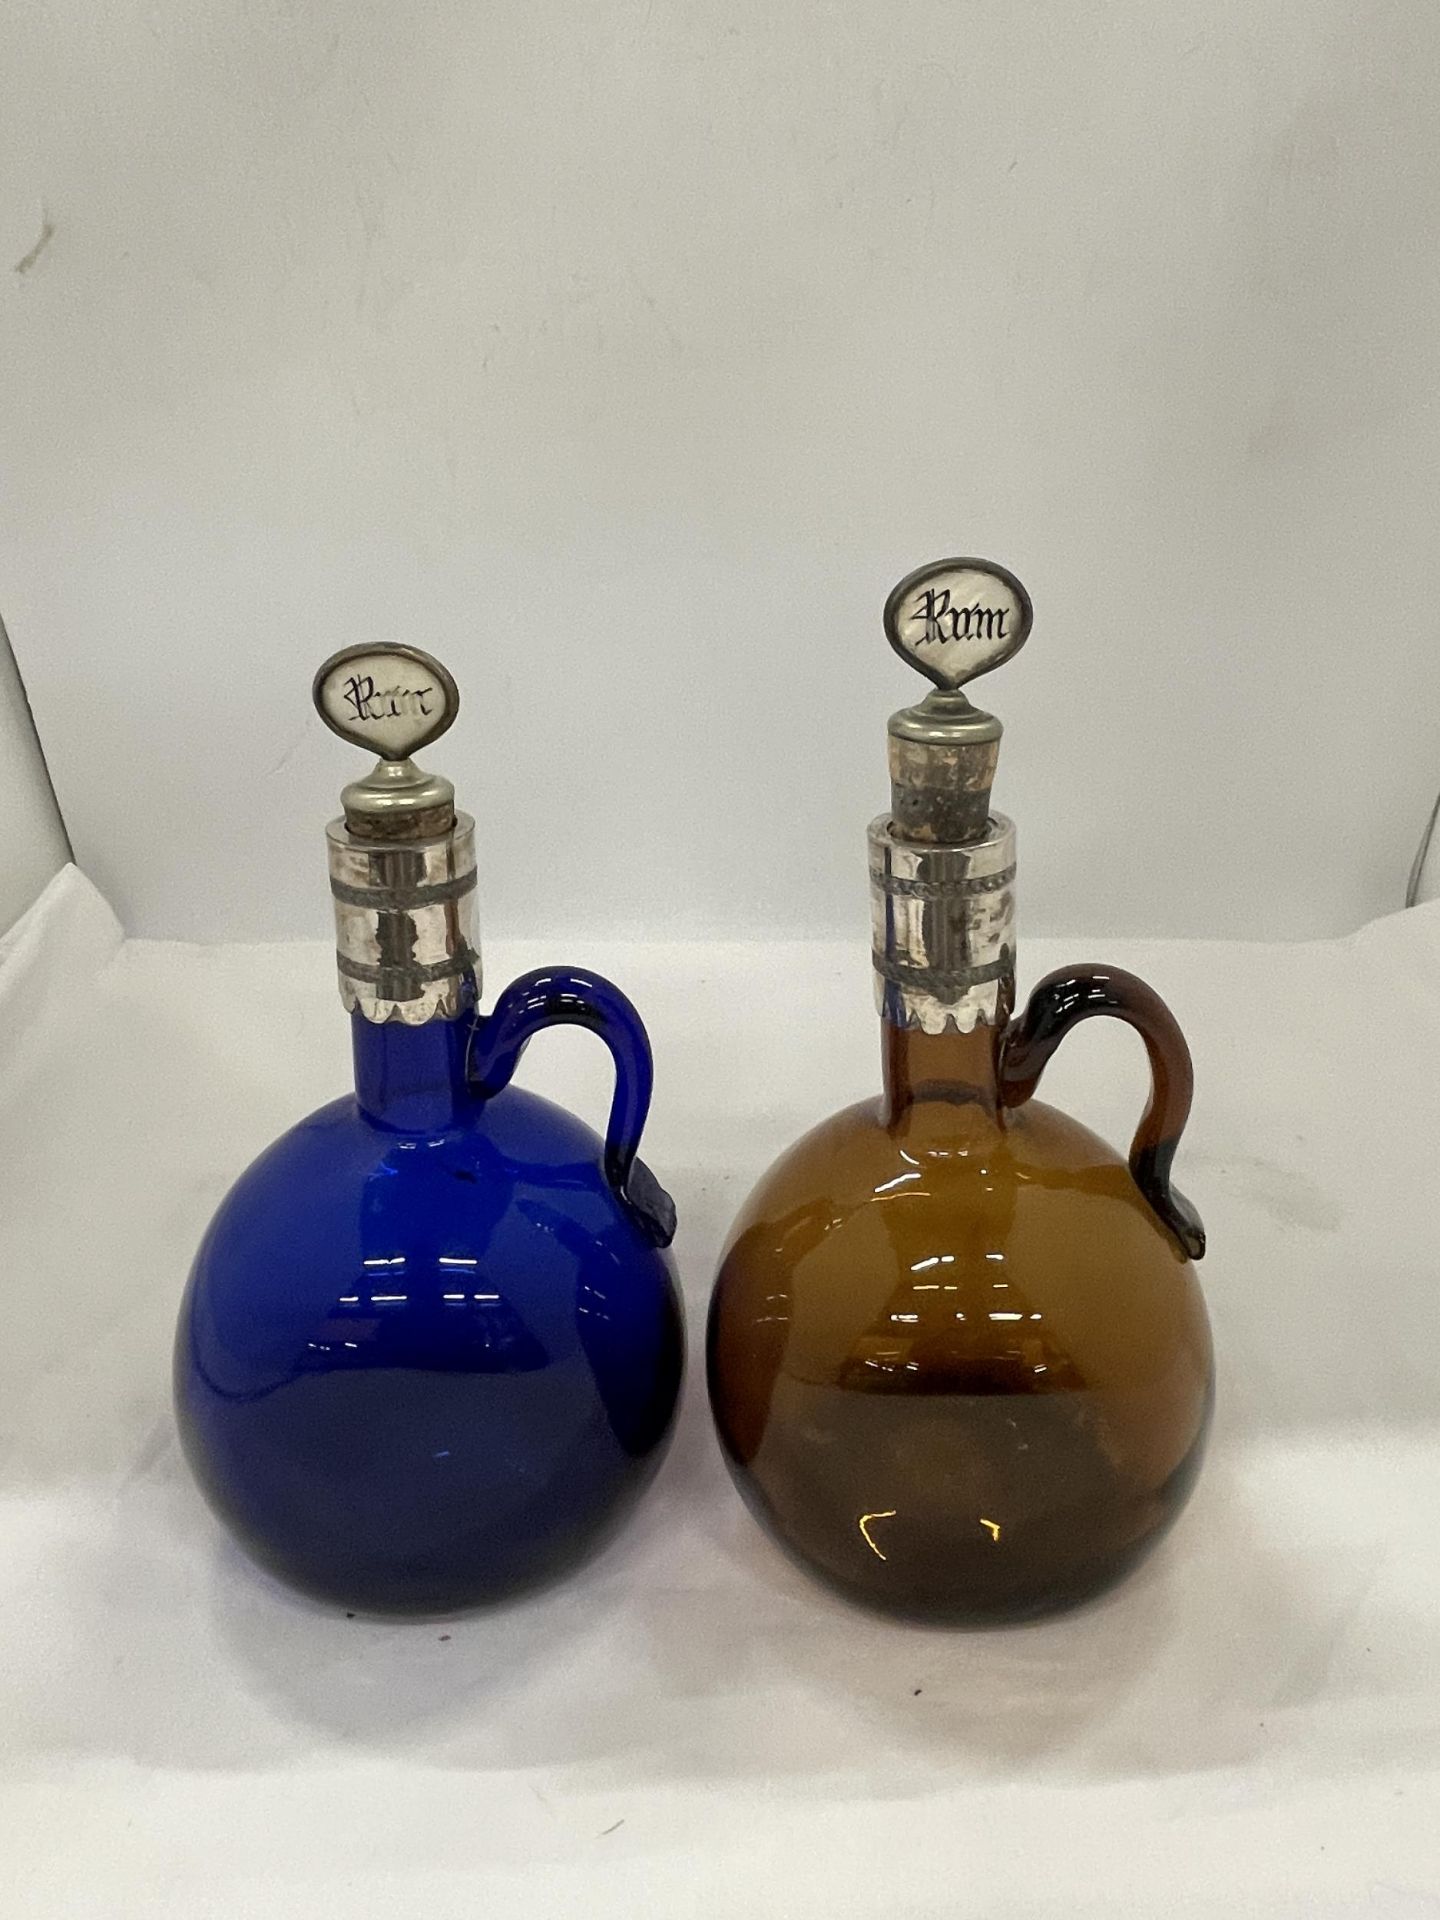 TWO ANTIQUE COLOURED GLASS DECANTERS/FLAGONS WITH SILVER PLATED COLLARS, PORT AND RUM CORKS